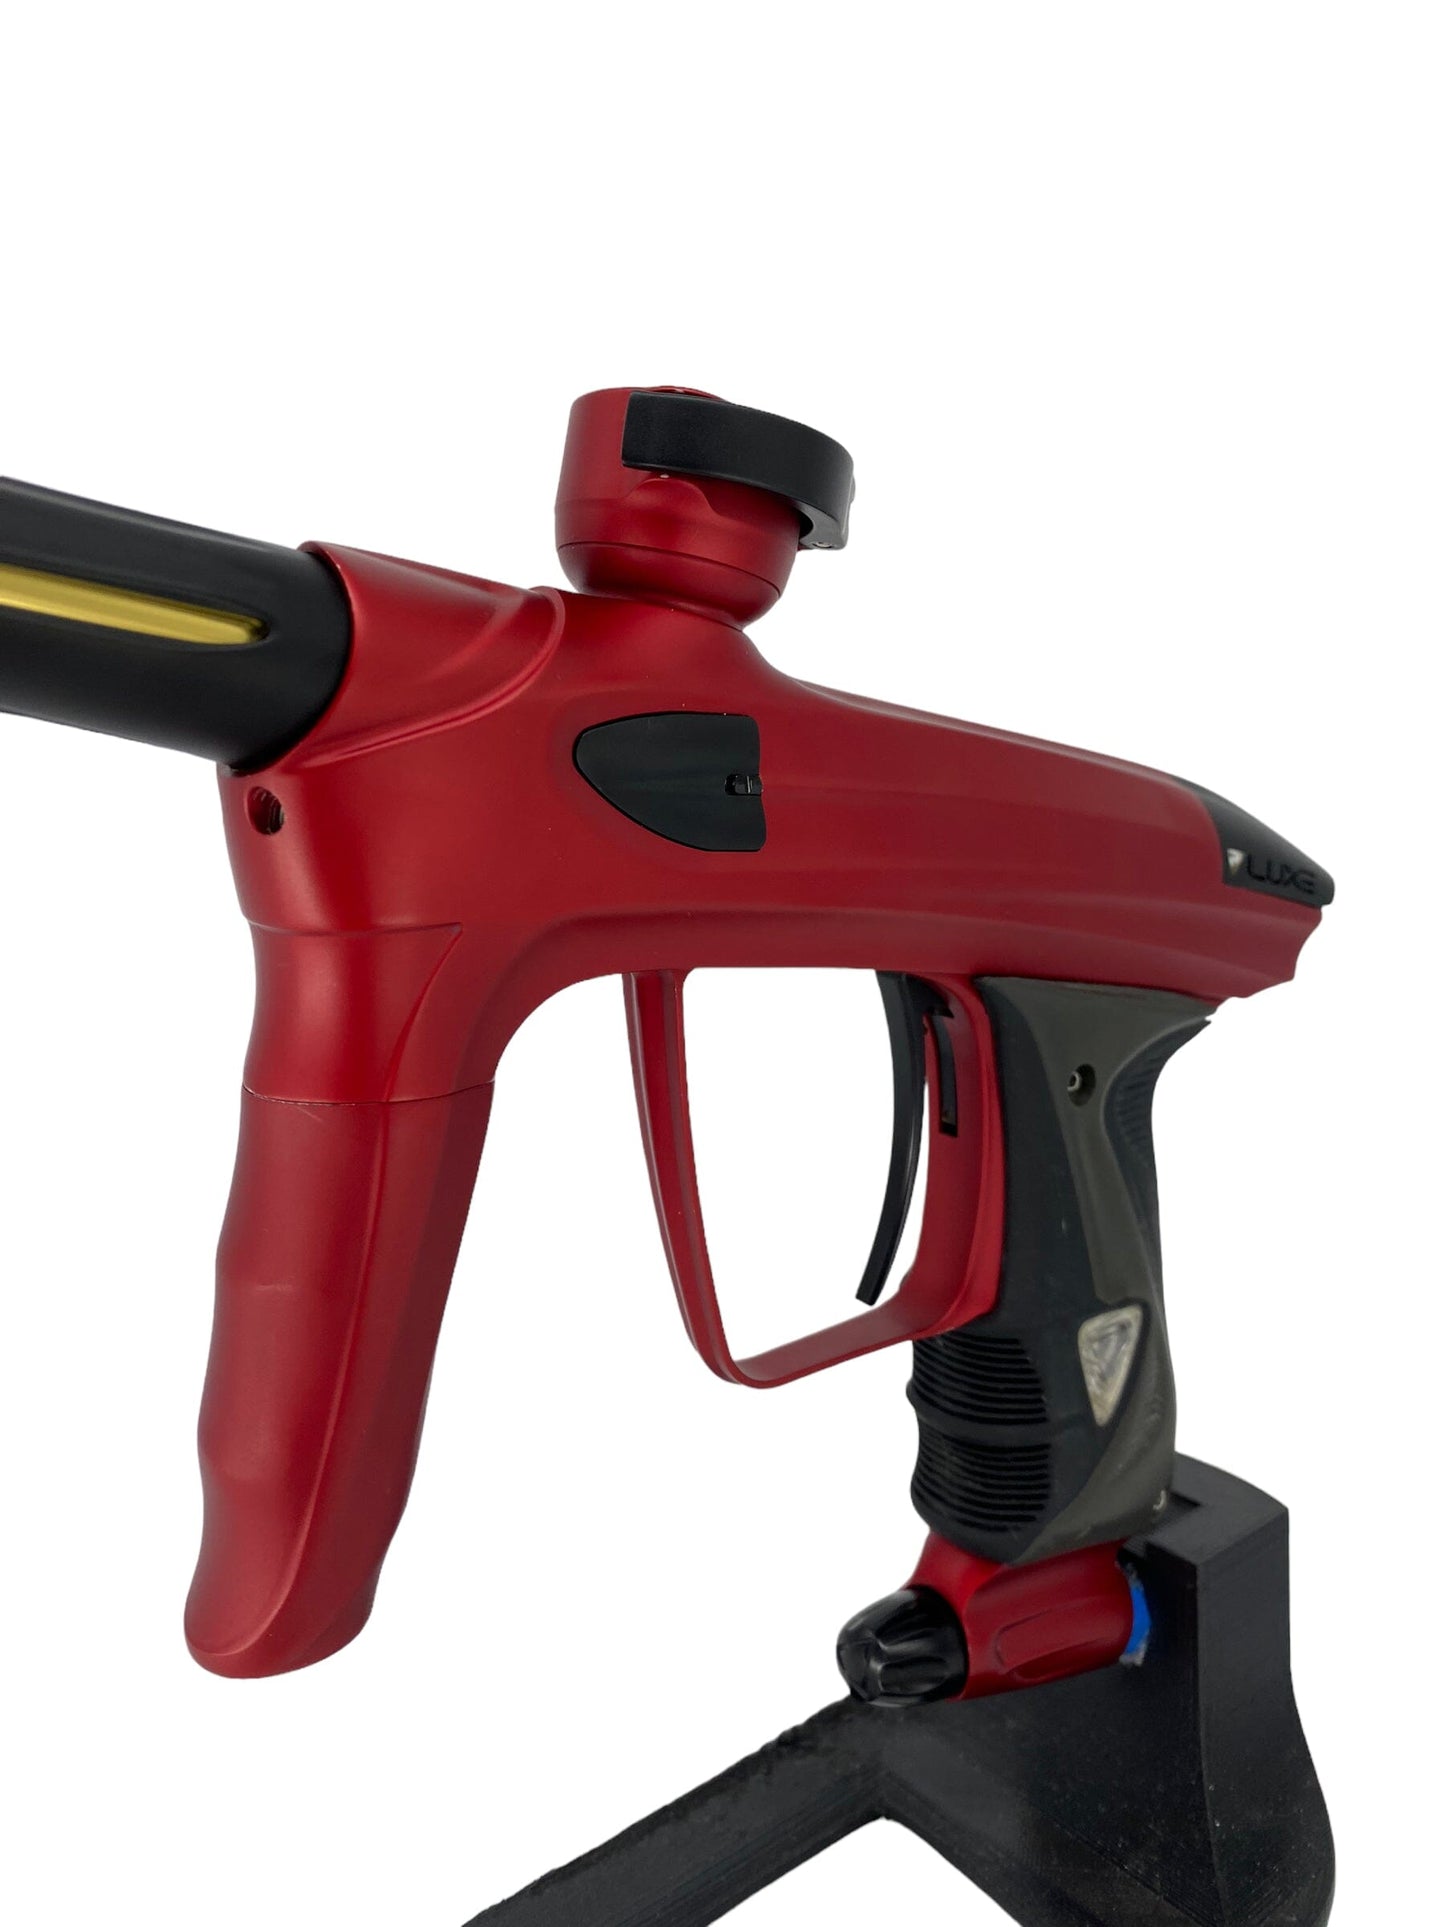 Used Dlx Luxe Oled Paintball Gun from CPXBrosPaintball Buy/Sell/Trade Paintball Markers, Paintball Hoppers, Paintball Masks, and Hormesis Headbands